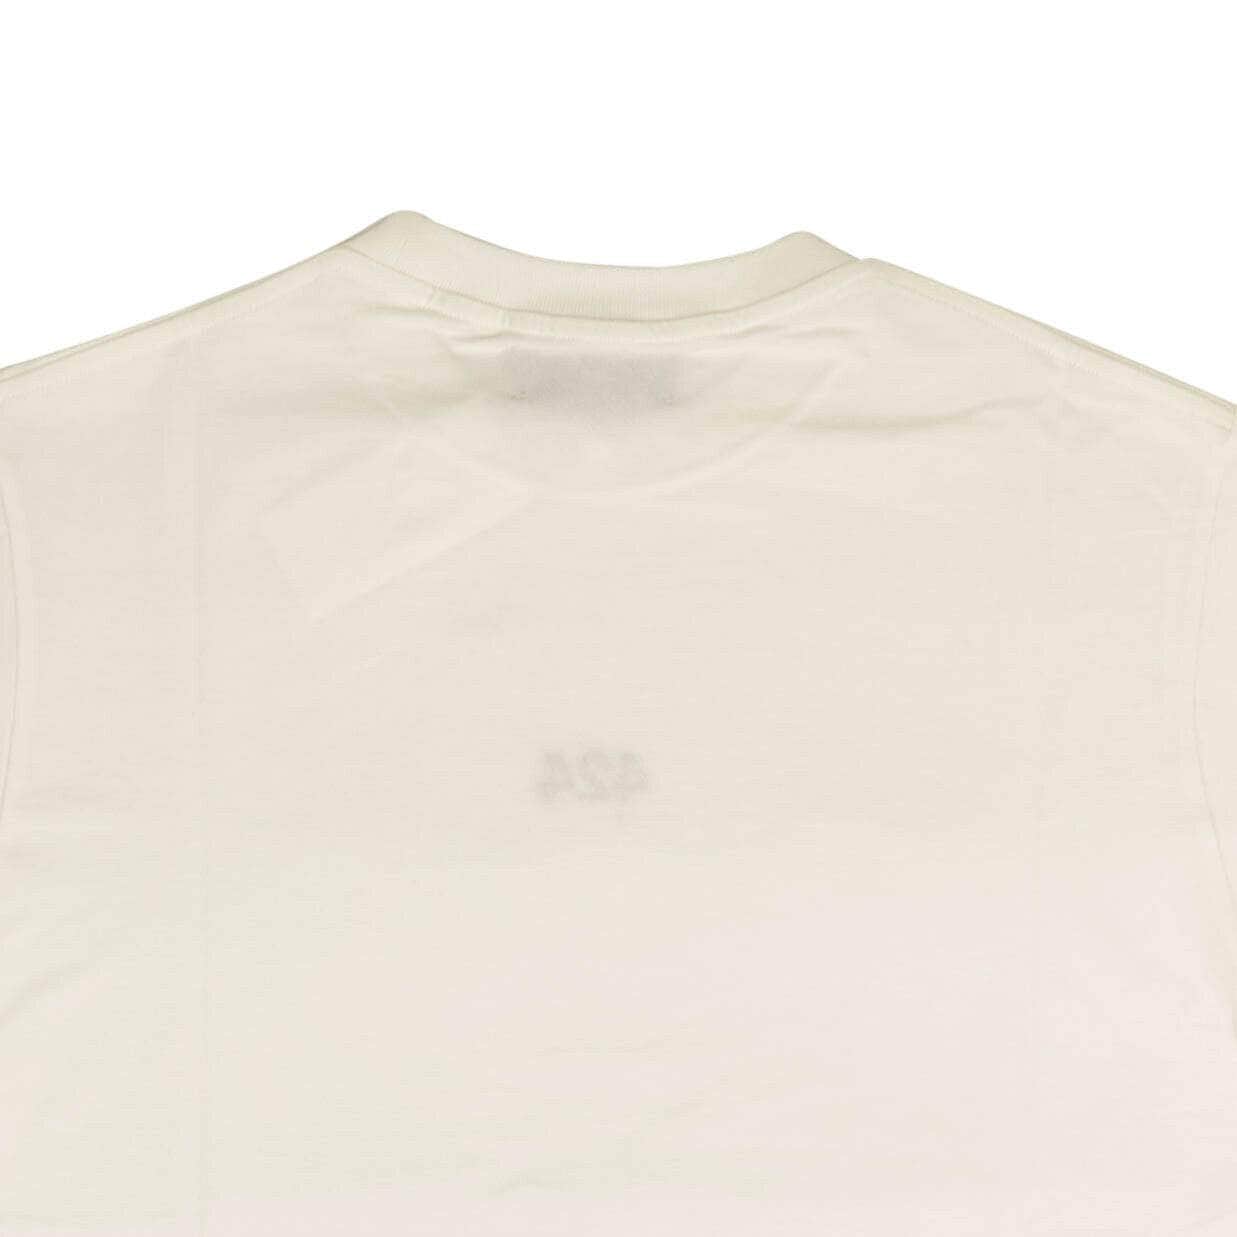 424 ON FAIRFAX 424-on-fairfax, channelenable-all, chicmi, couponcollection, gender-mens, main-clothing, mens-shoes, size-l, size-m, size-s, size-xl, size-xs, under-250 White Logo Cotton Short Sleeve T-Shirt